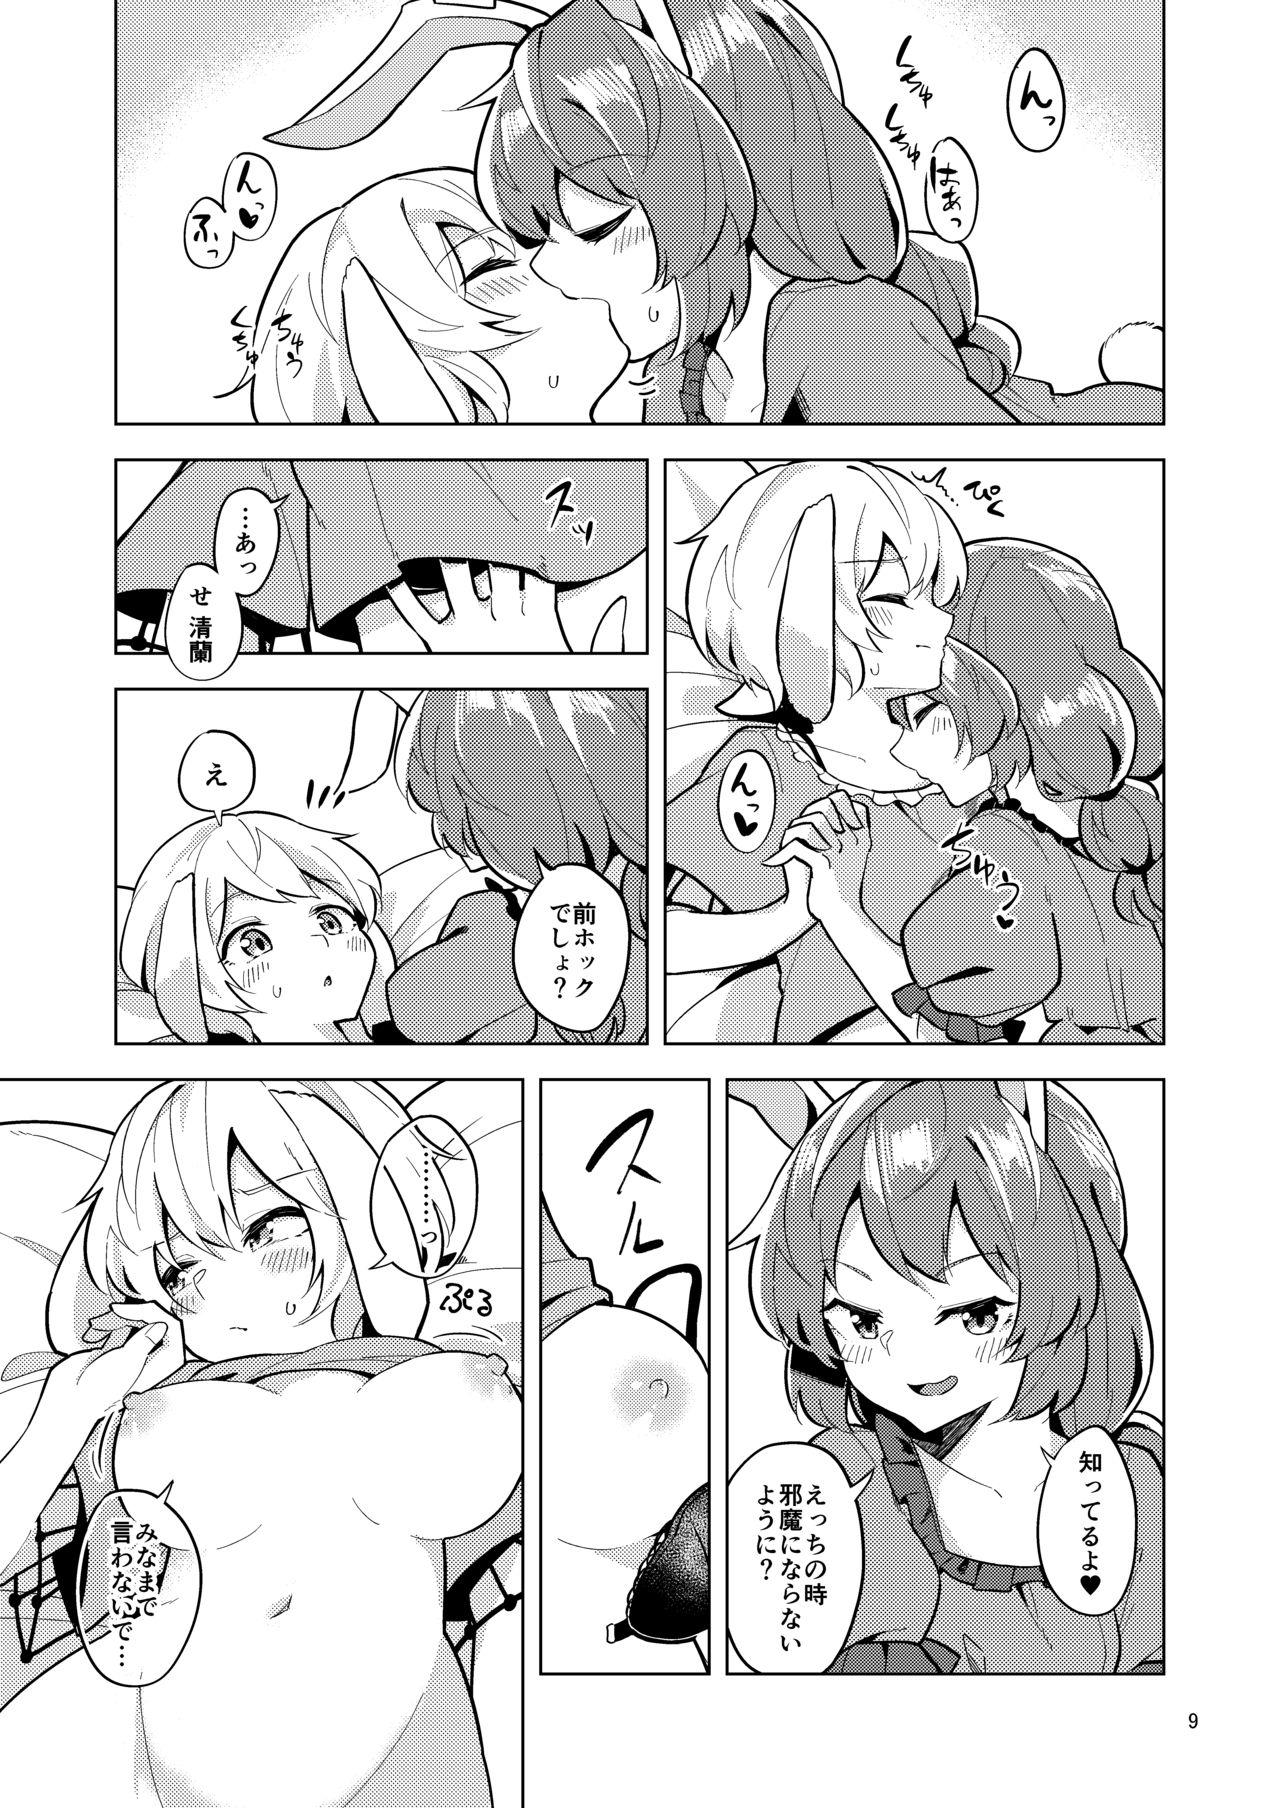 Highheels Bittersweet Greenapple 2 - Touhou project Doggy Style Porn - Page 9